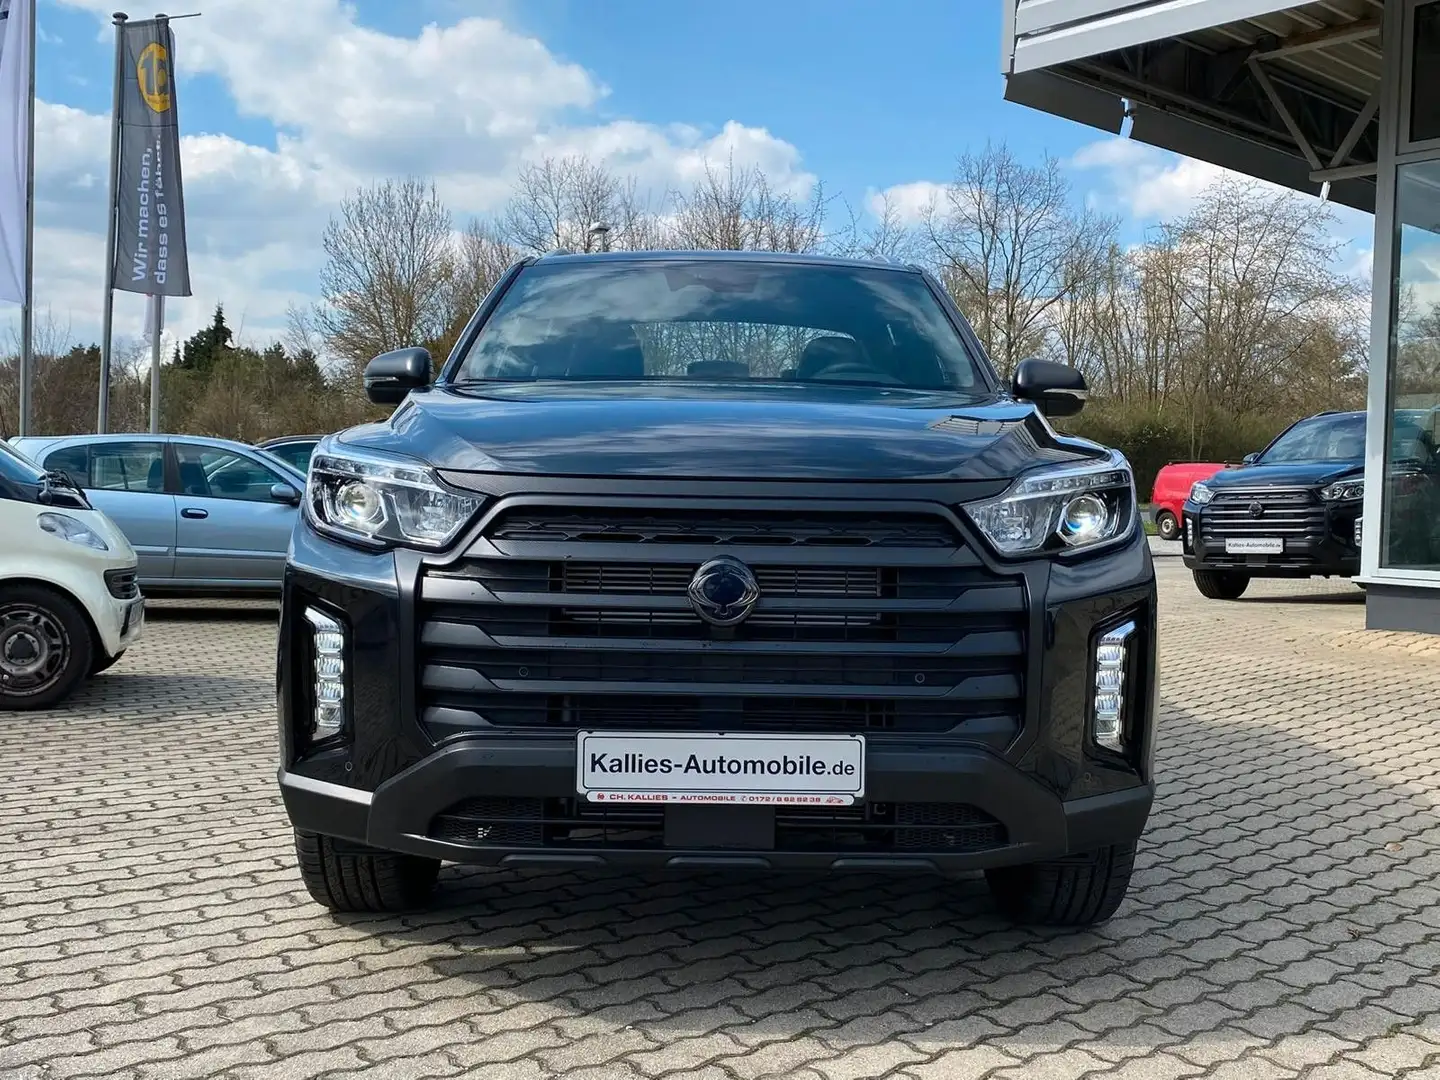 SsangYong Musso Musso Grand 2.2d AT 4x4 BLACK XENON+SD+DIFF+LRW Szürke - 2